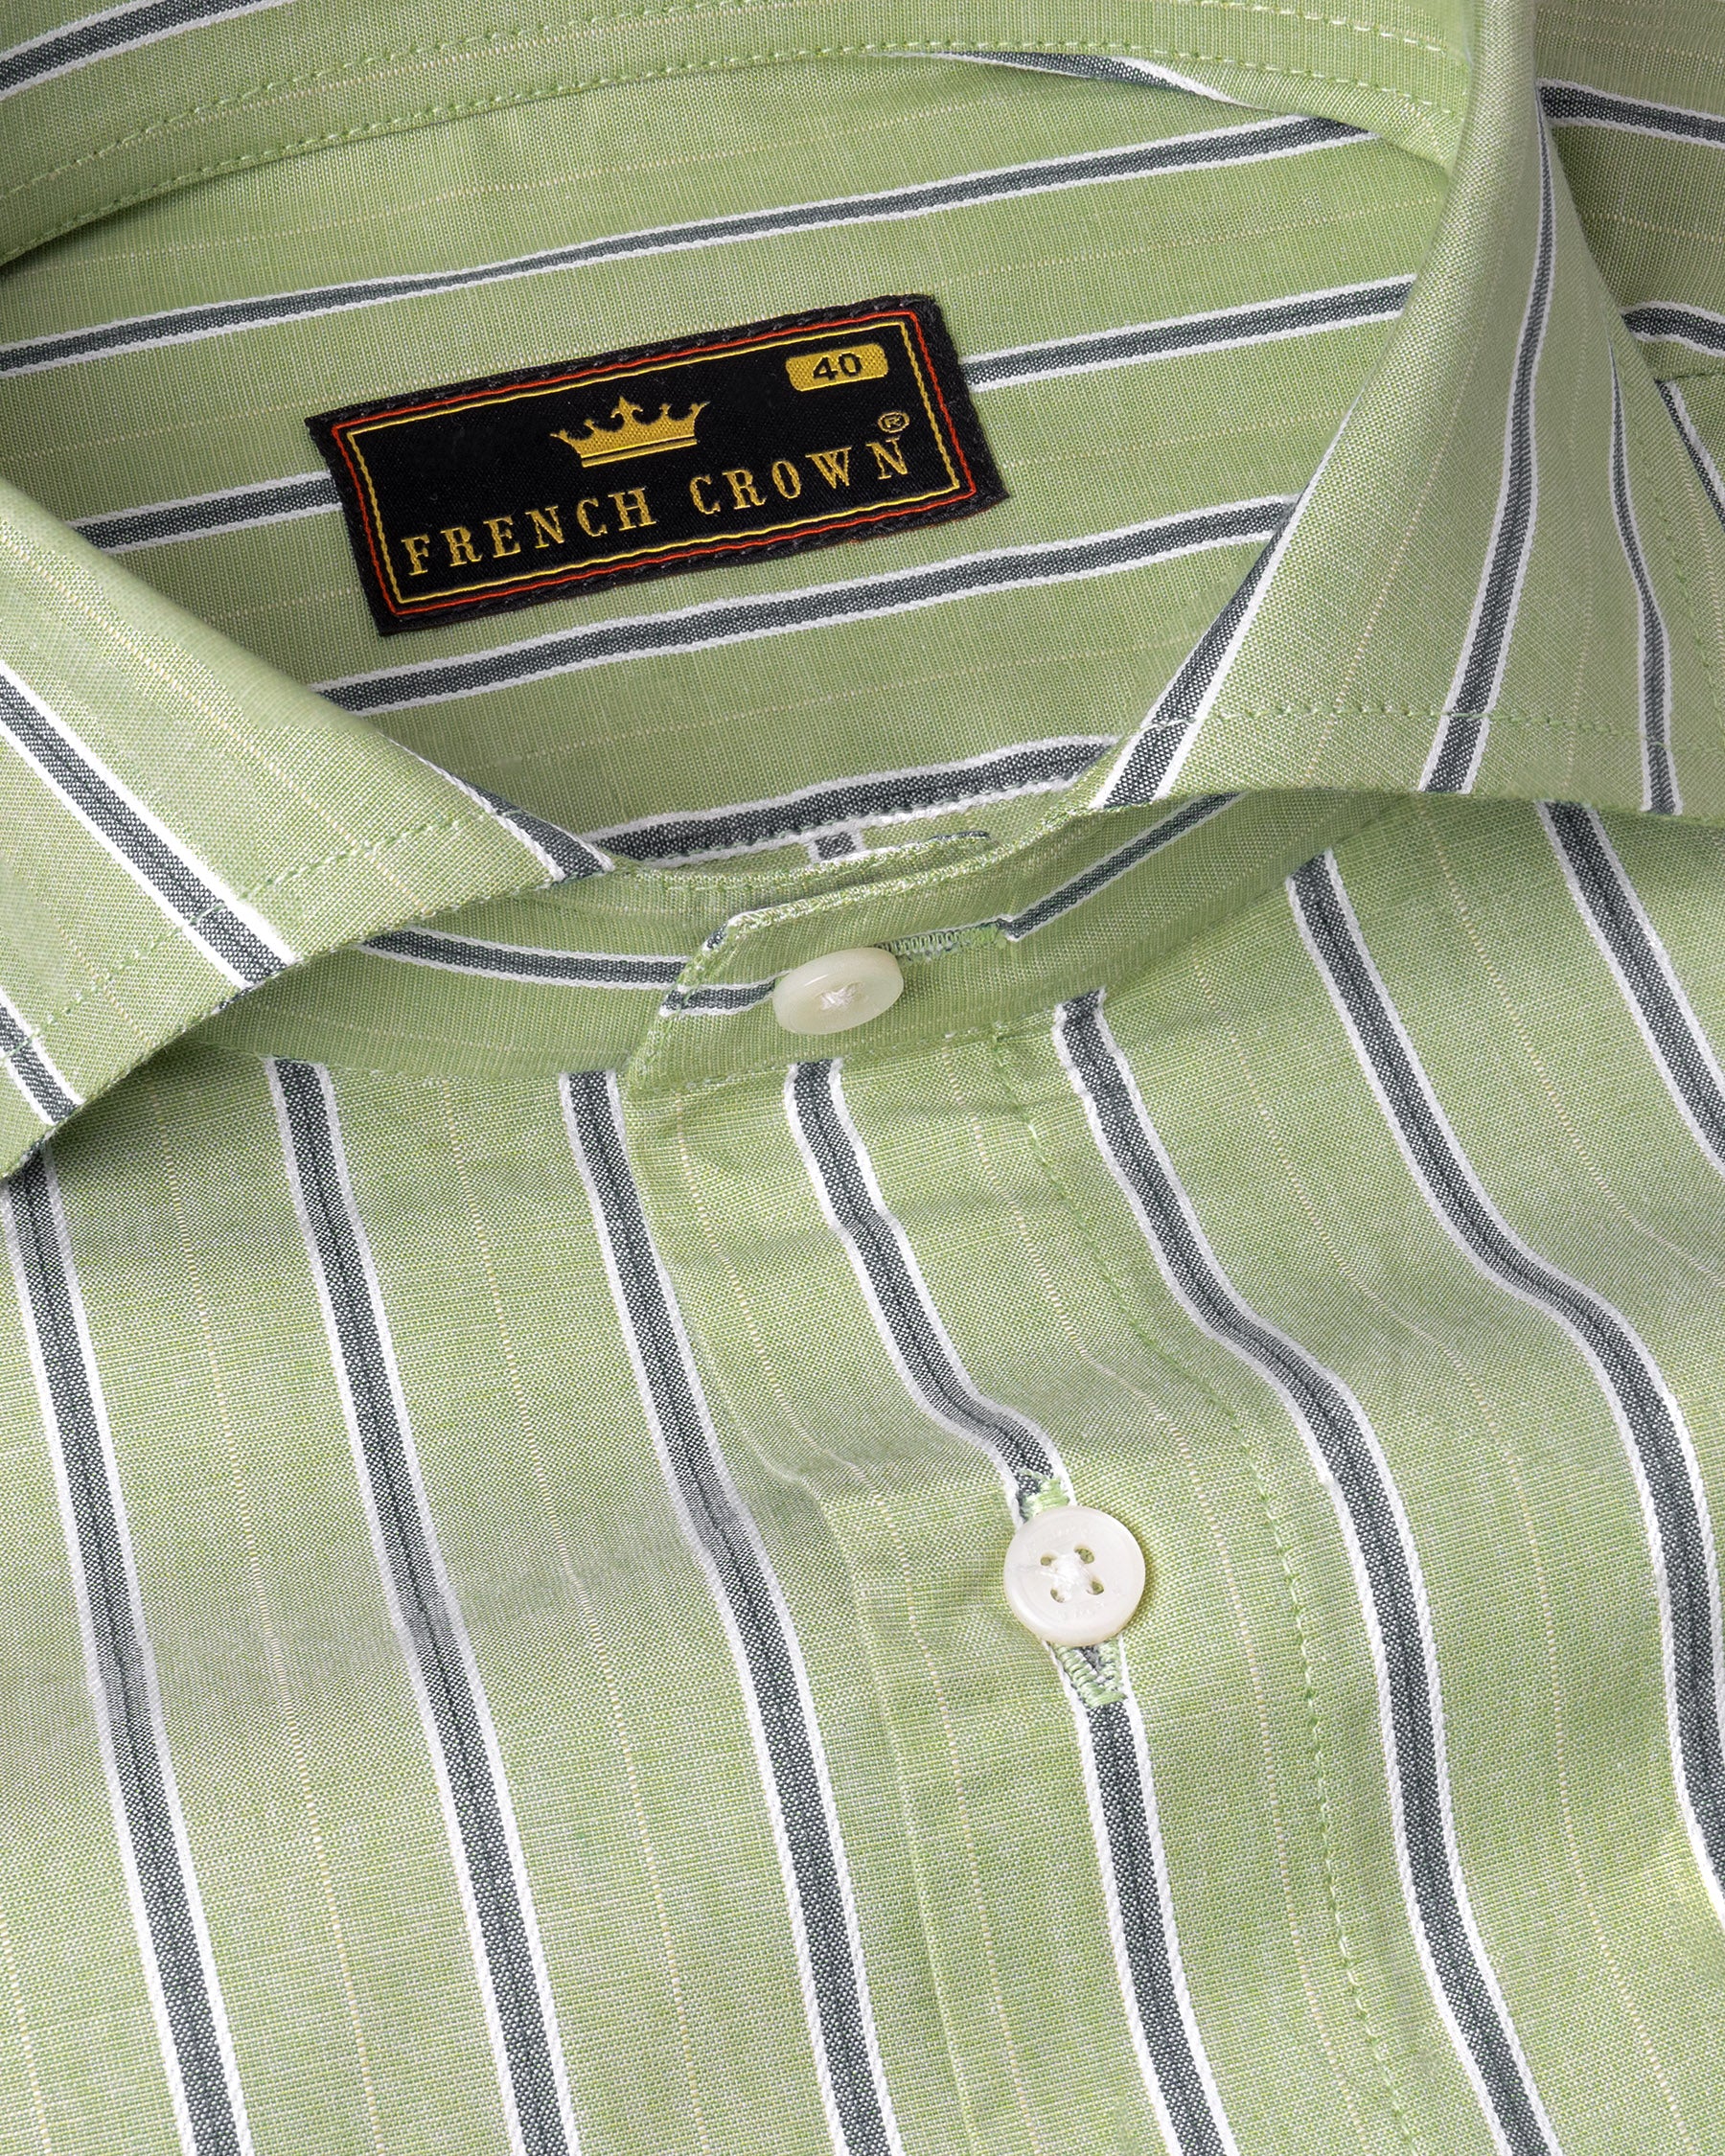 Swamp Green with Storm Dust Stripes Premium Cotton Shirt 5225-CA-38, 5225-CA-H-38, 5225-CA-39, 5225-CA-H-39, 5225-CA-40, 5225-CA-H-40, 5225-CA-42, 5225-CA-H-42, 5225-CA-44, 5225-CA-H-44, 5225-CA-46, 5225-CA-H-46, 5225-CA-48, 5225-CA-H-48, 5225-CA-50, 5225-CA-H-50, 5225-CA-52, 5225-CA-H-52